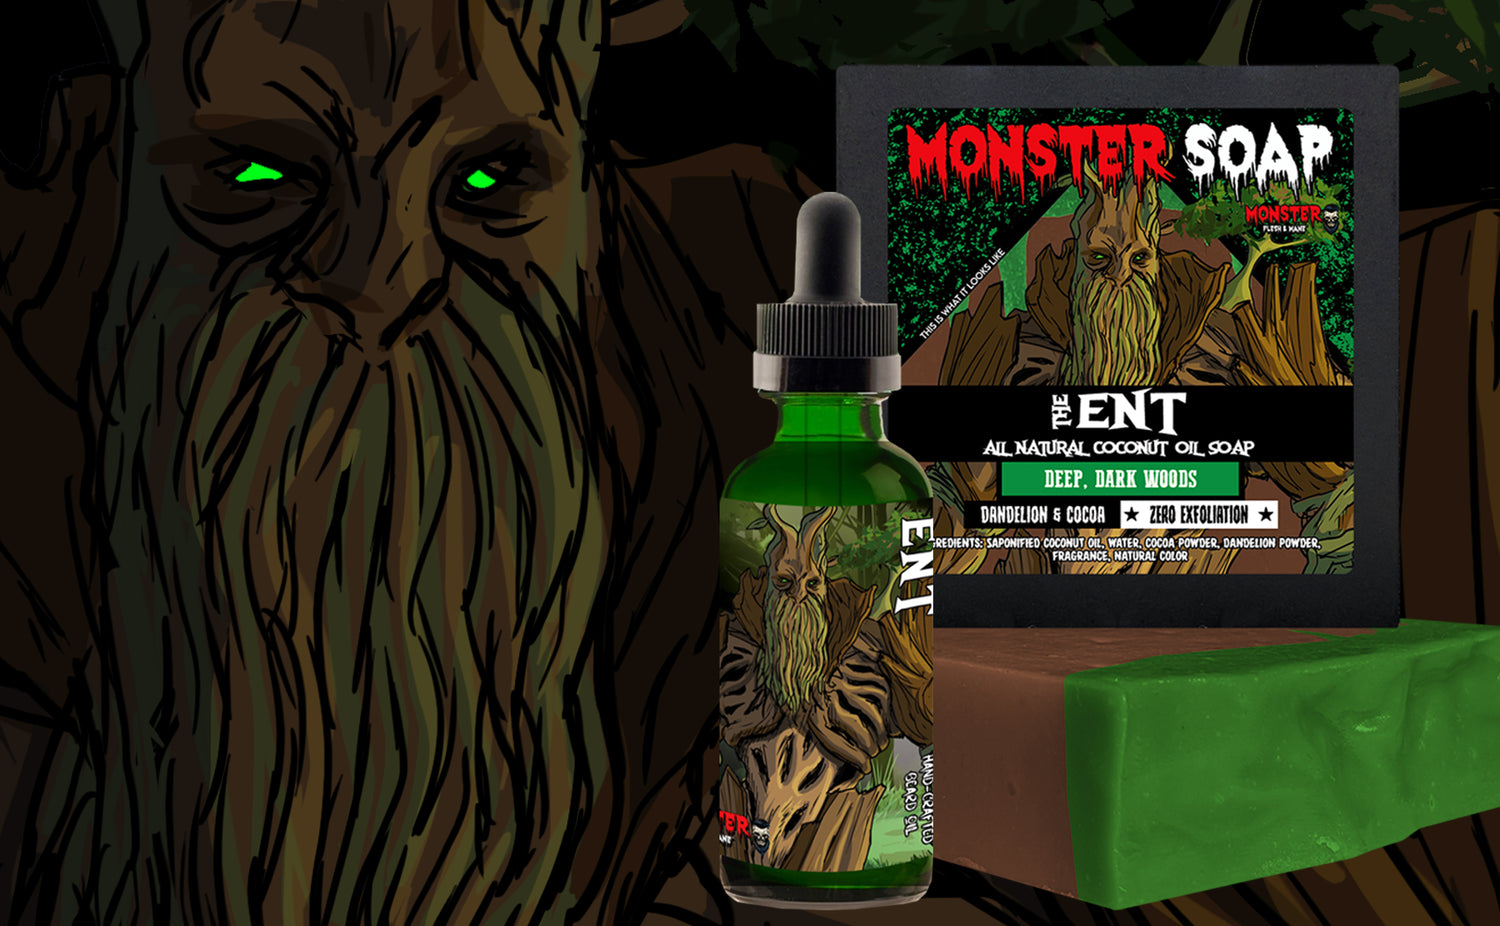 The Ent